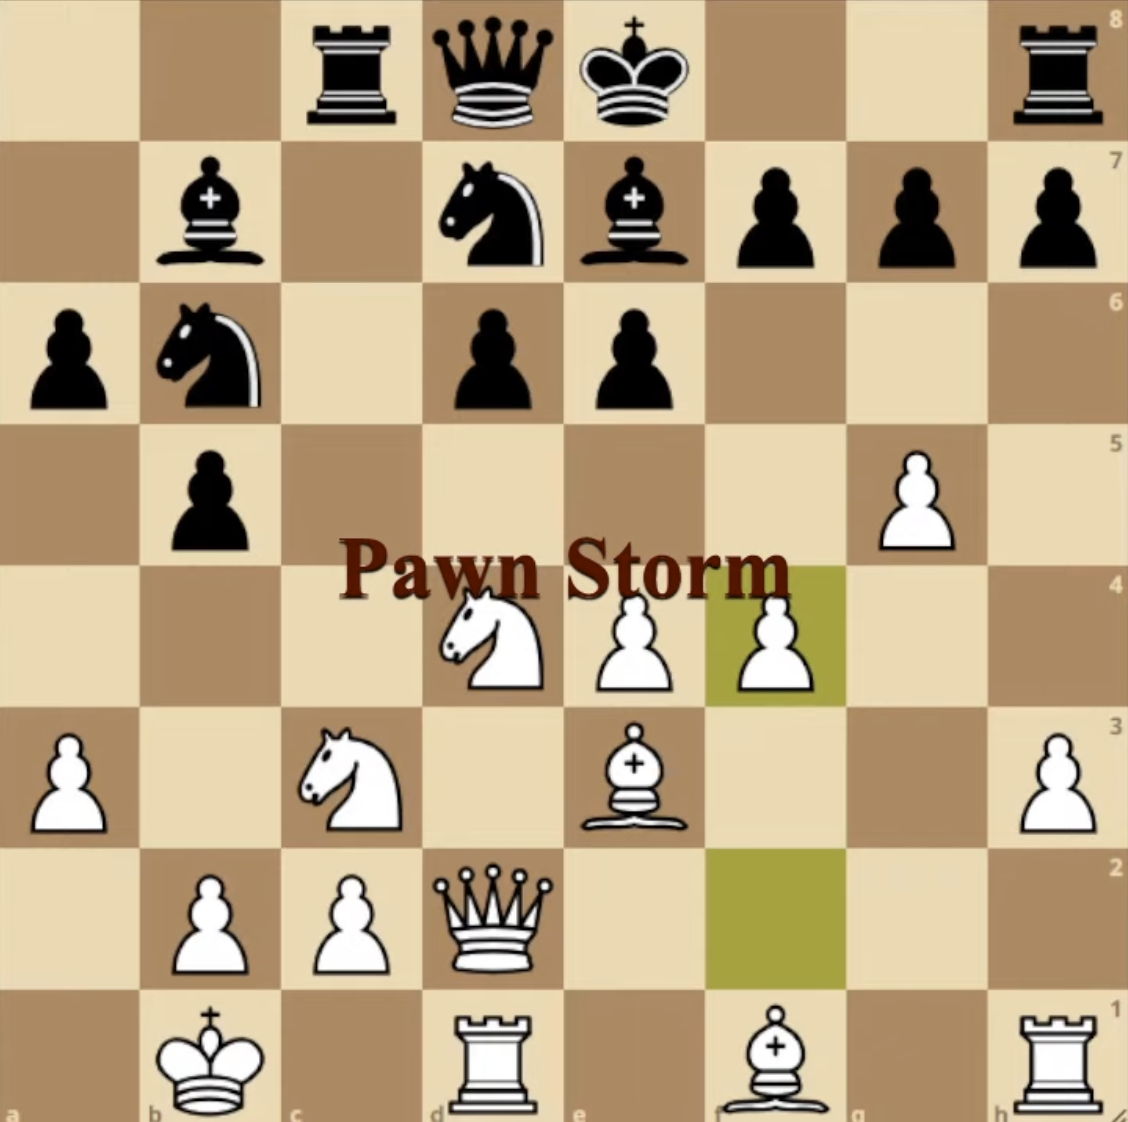 What Is a Pawn in Chess? Learn How to Move Your Pawn Pieces - 2023